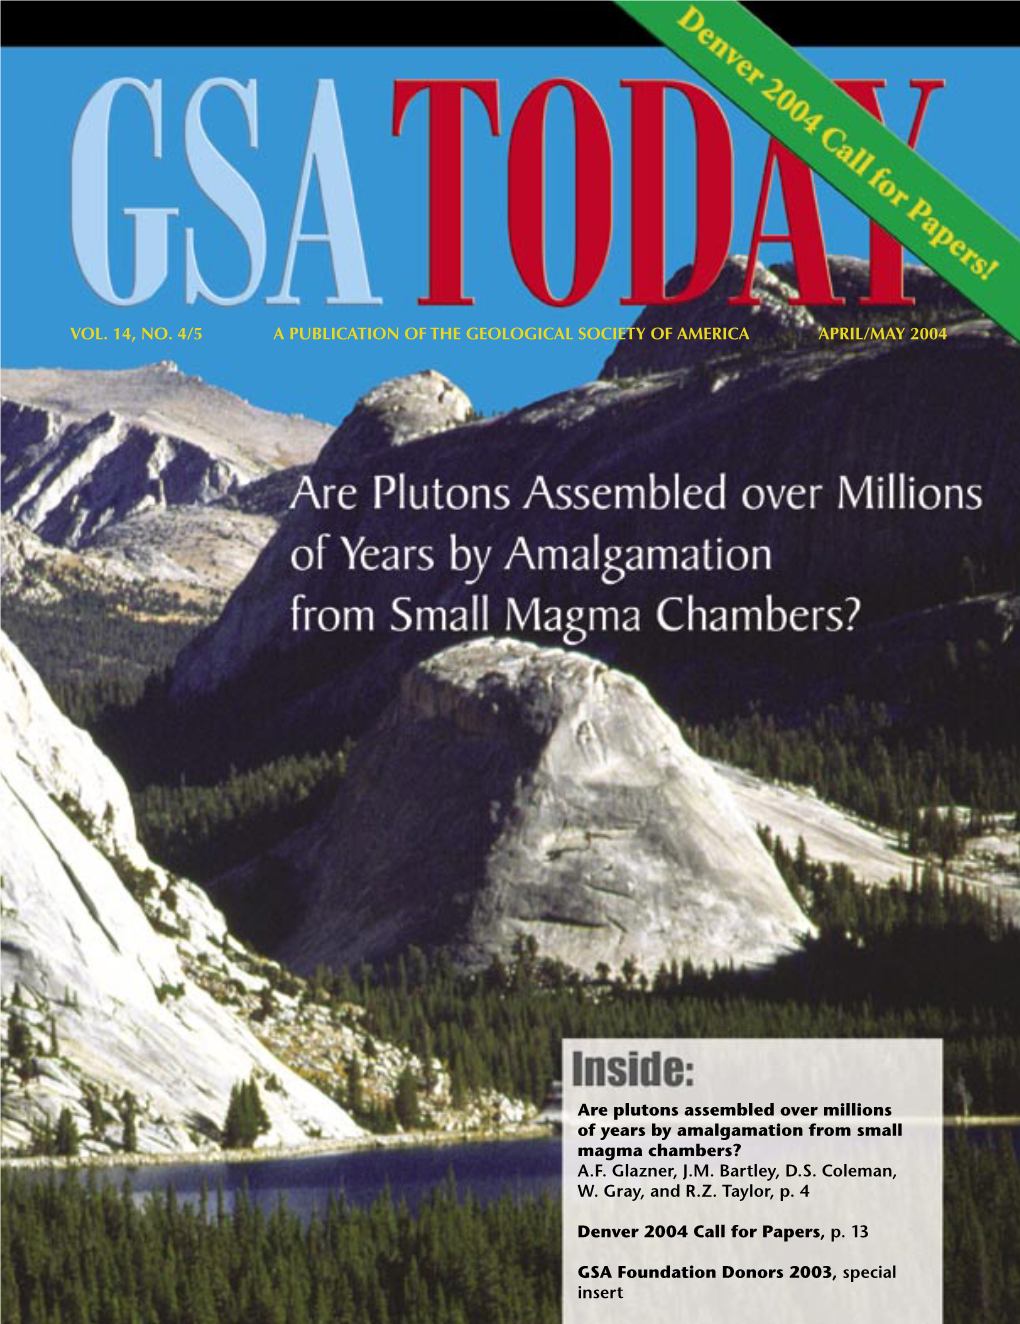 Vol. 14, No. 4/5 a Publication of the Geological Society of America April/May 2004